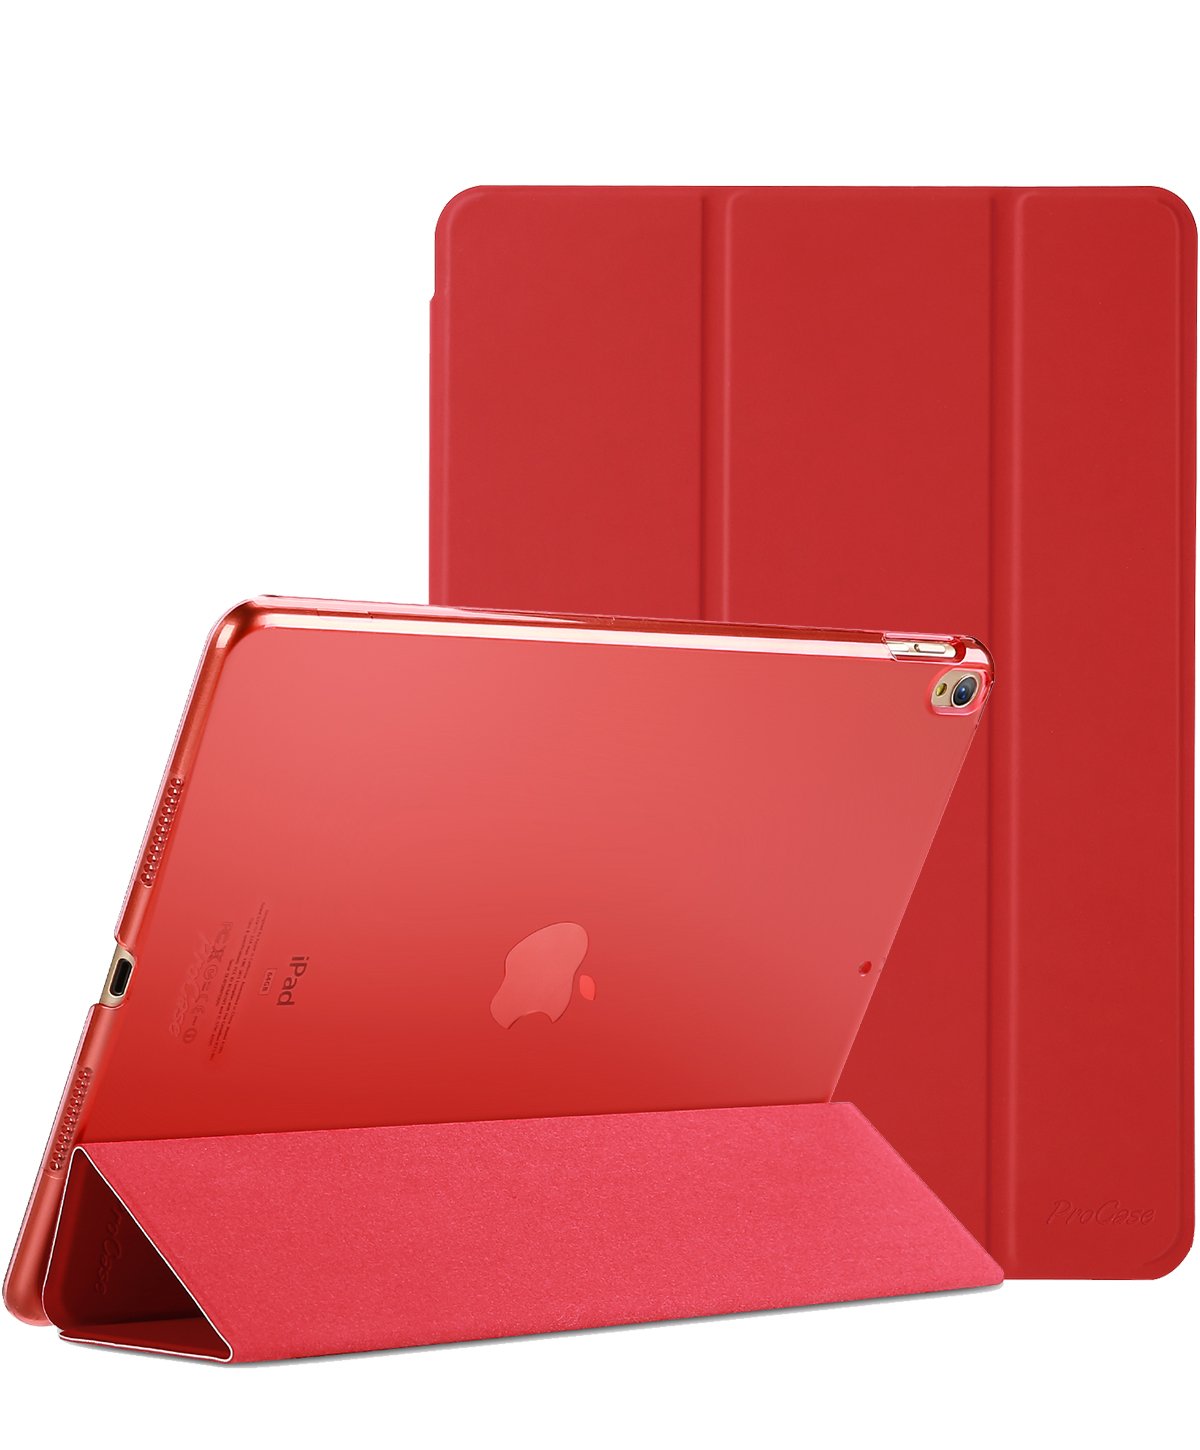 ProCase for iPad Air 3rd 10.5 2019 / iPad Pro 10.5 2017 Case, Ultra Slim Light Weight Cover with Translucent Back for iPad 10.5 inch -Red